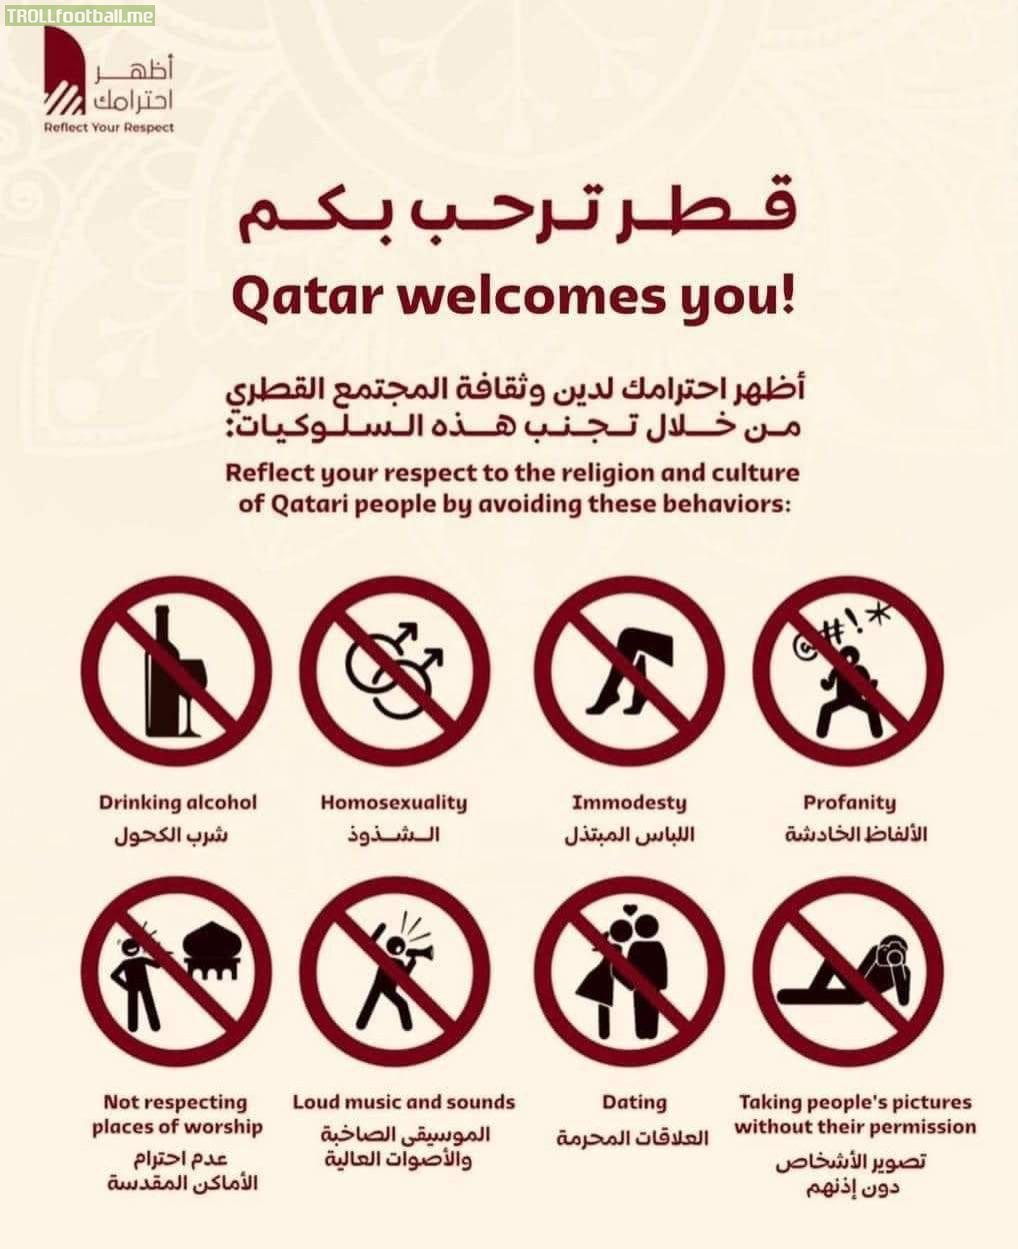 Quatar World cup seems like a great party to attend.